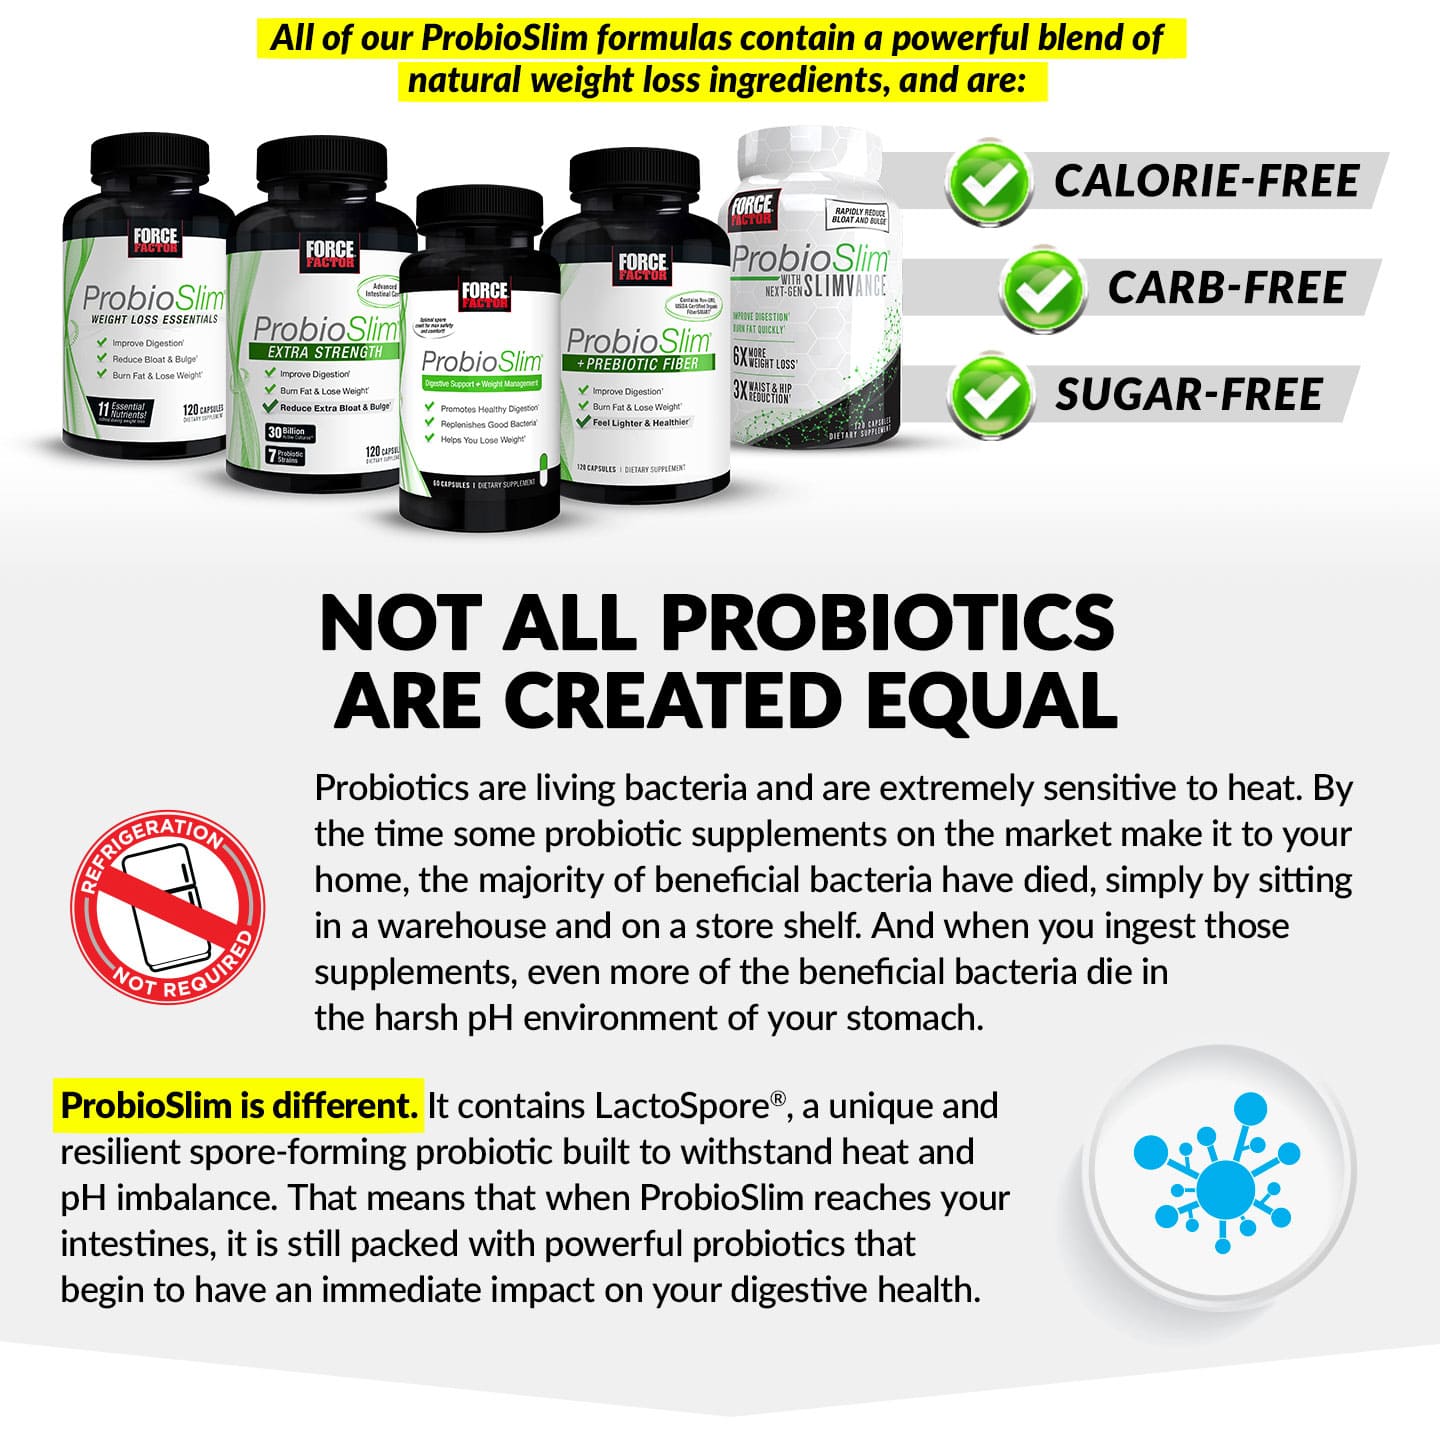 All of our ProbioSlim formulas contain a powerful blend of natural weight loss ingredients, and are: CALORIE-FERE, CARB-FREE, SUGAR-FREE. NOT ALL PROBIOTICS ARE CREATED EQUAL. Probiotics are living bacteria and are extremely sensitive to heat. By the time most probiotic supplements on the market make it to your home, the majority of beneficial bacteria have died, simply by sitting in a warehouse and on a store shelf. And when you ingest those supplements, even more of the beneficial bacteria die in the harsh pH environment of your stomach. ProbioSlim is different. These formulas all contain LactoSpore®, a unique and resilient spore-forming probiotic built to withstand heat and pH imbalance. That means that when ProbioSlim reaches your intestines, it is still packed with powerful probiotics that begin to have an immediate impact on your digestive health.